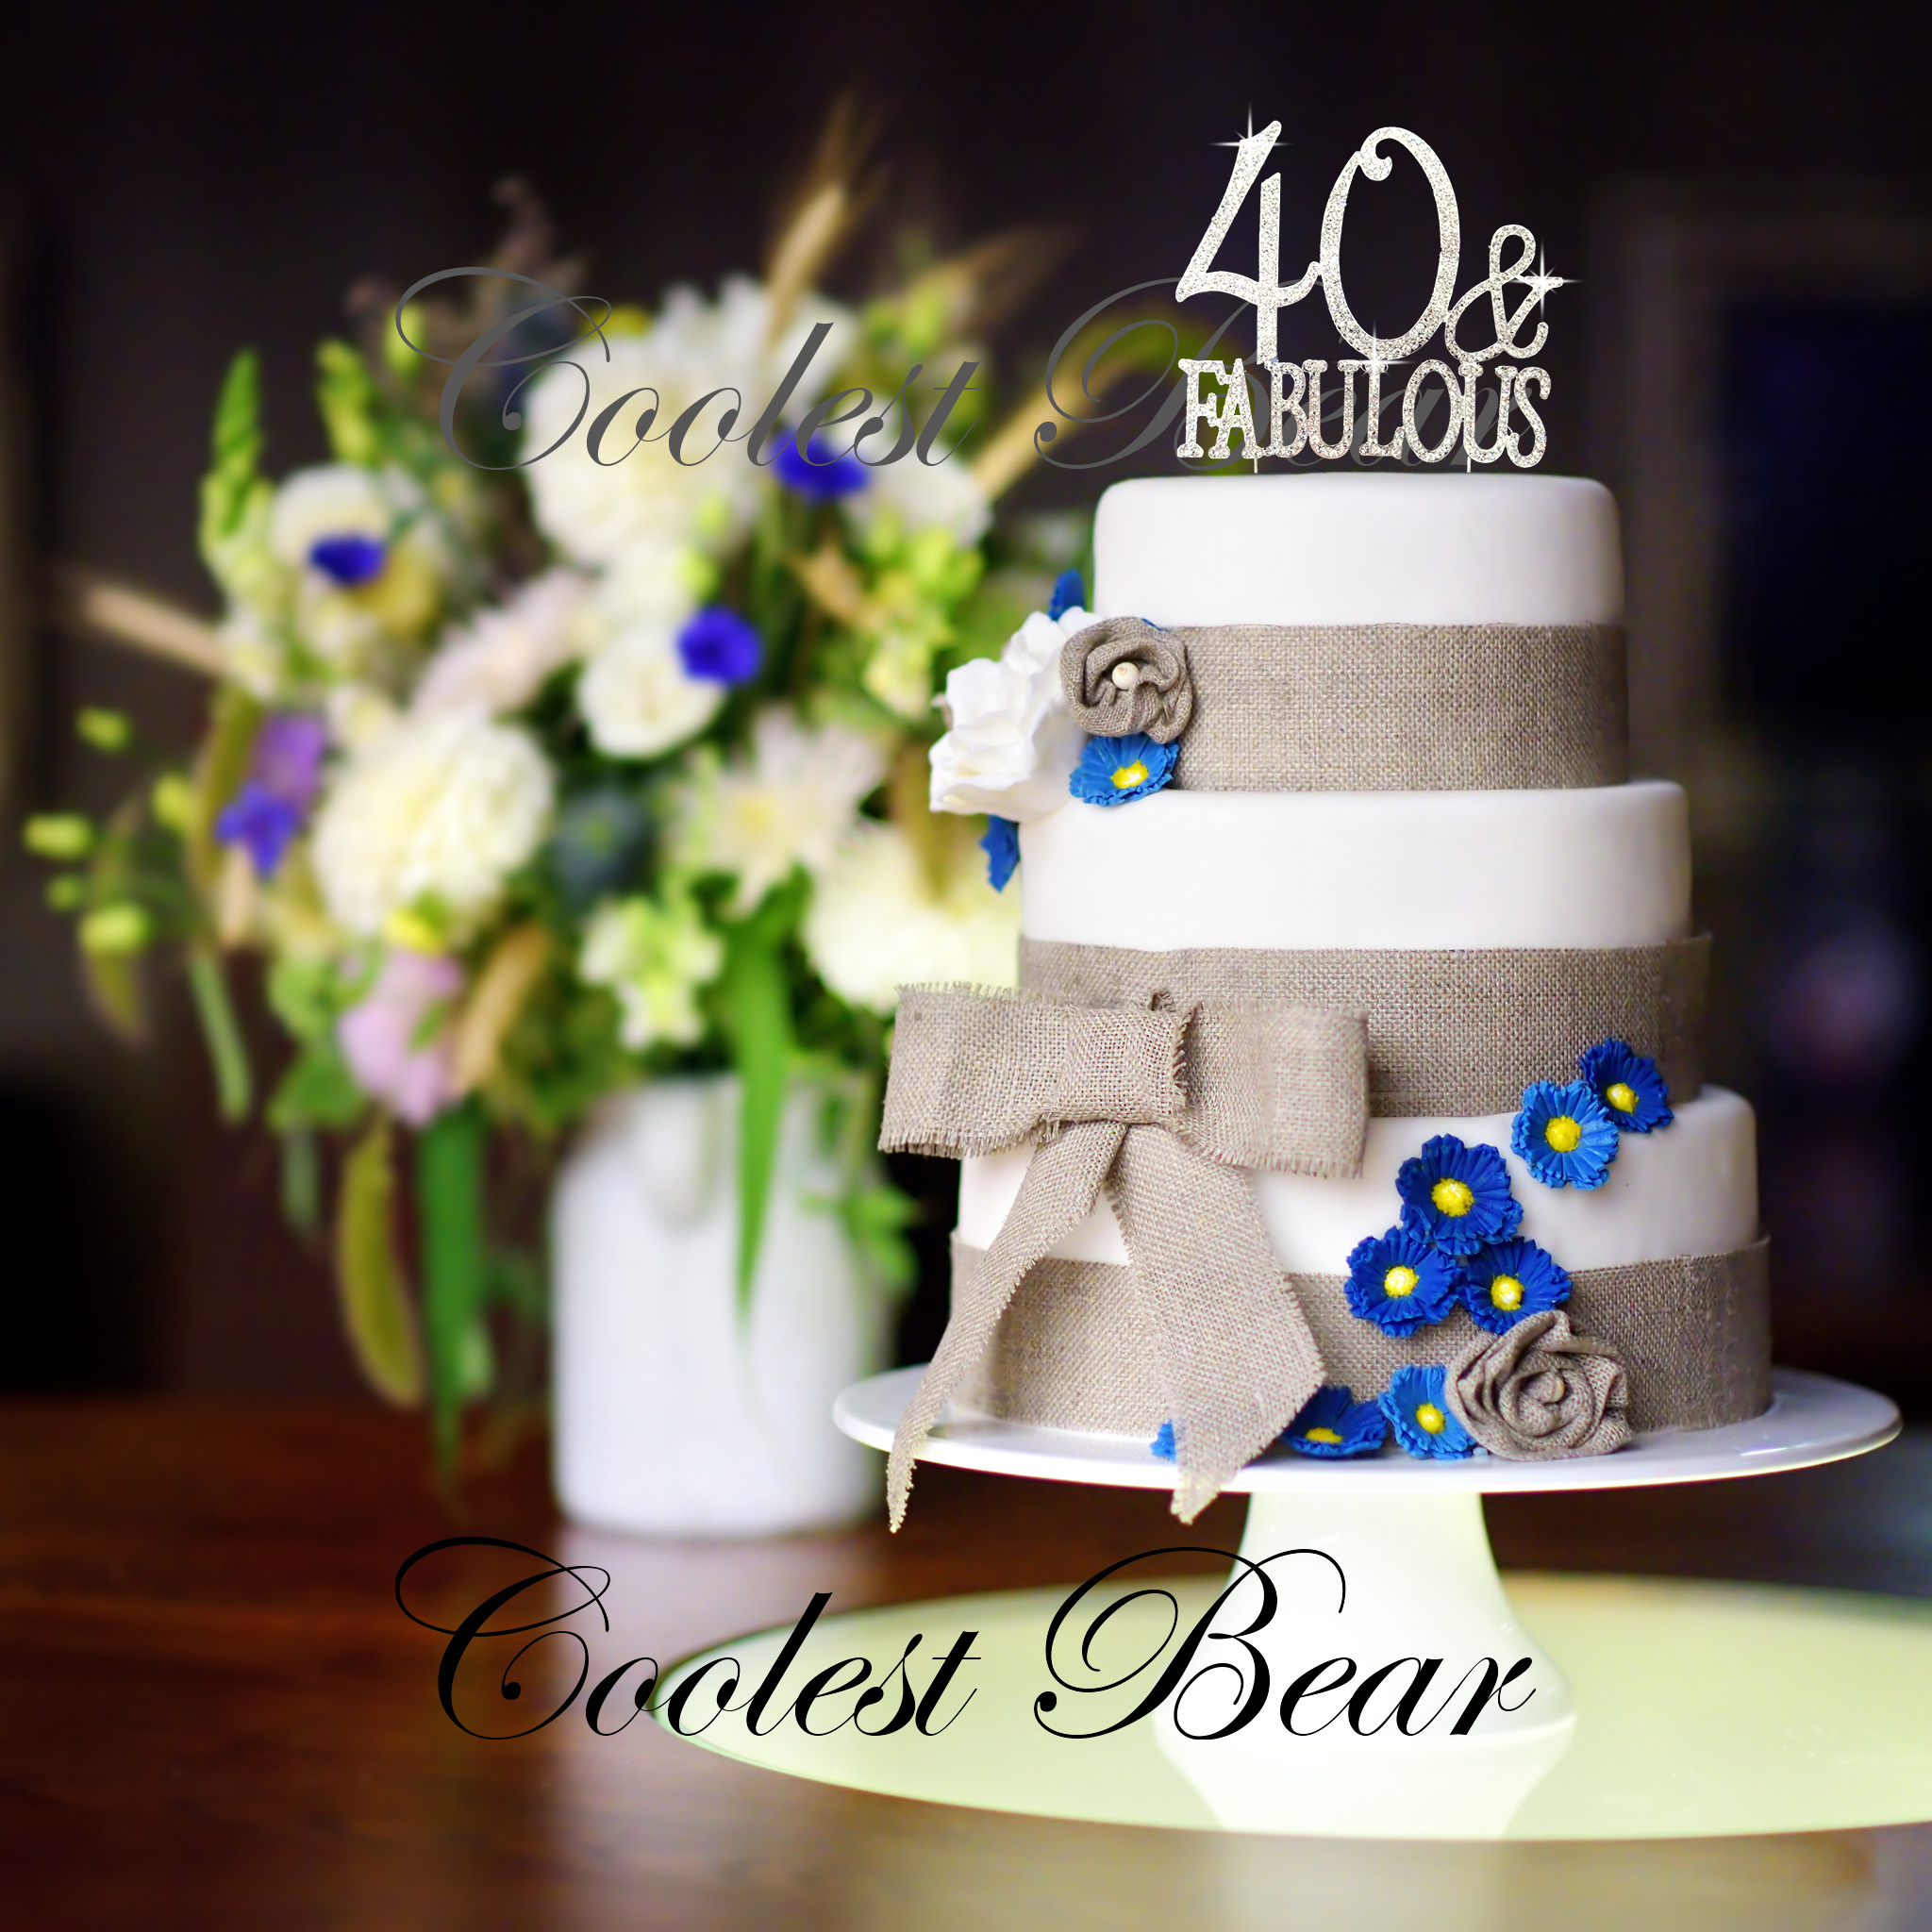 "40 & Fabulous", Silver - Coolest Bear Rhinestone Crystal Cake Topper - image 3 of 3